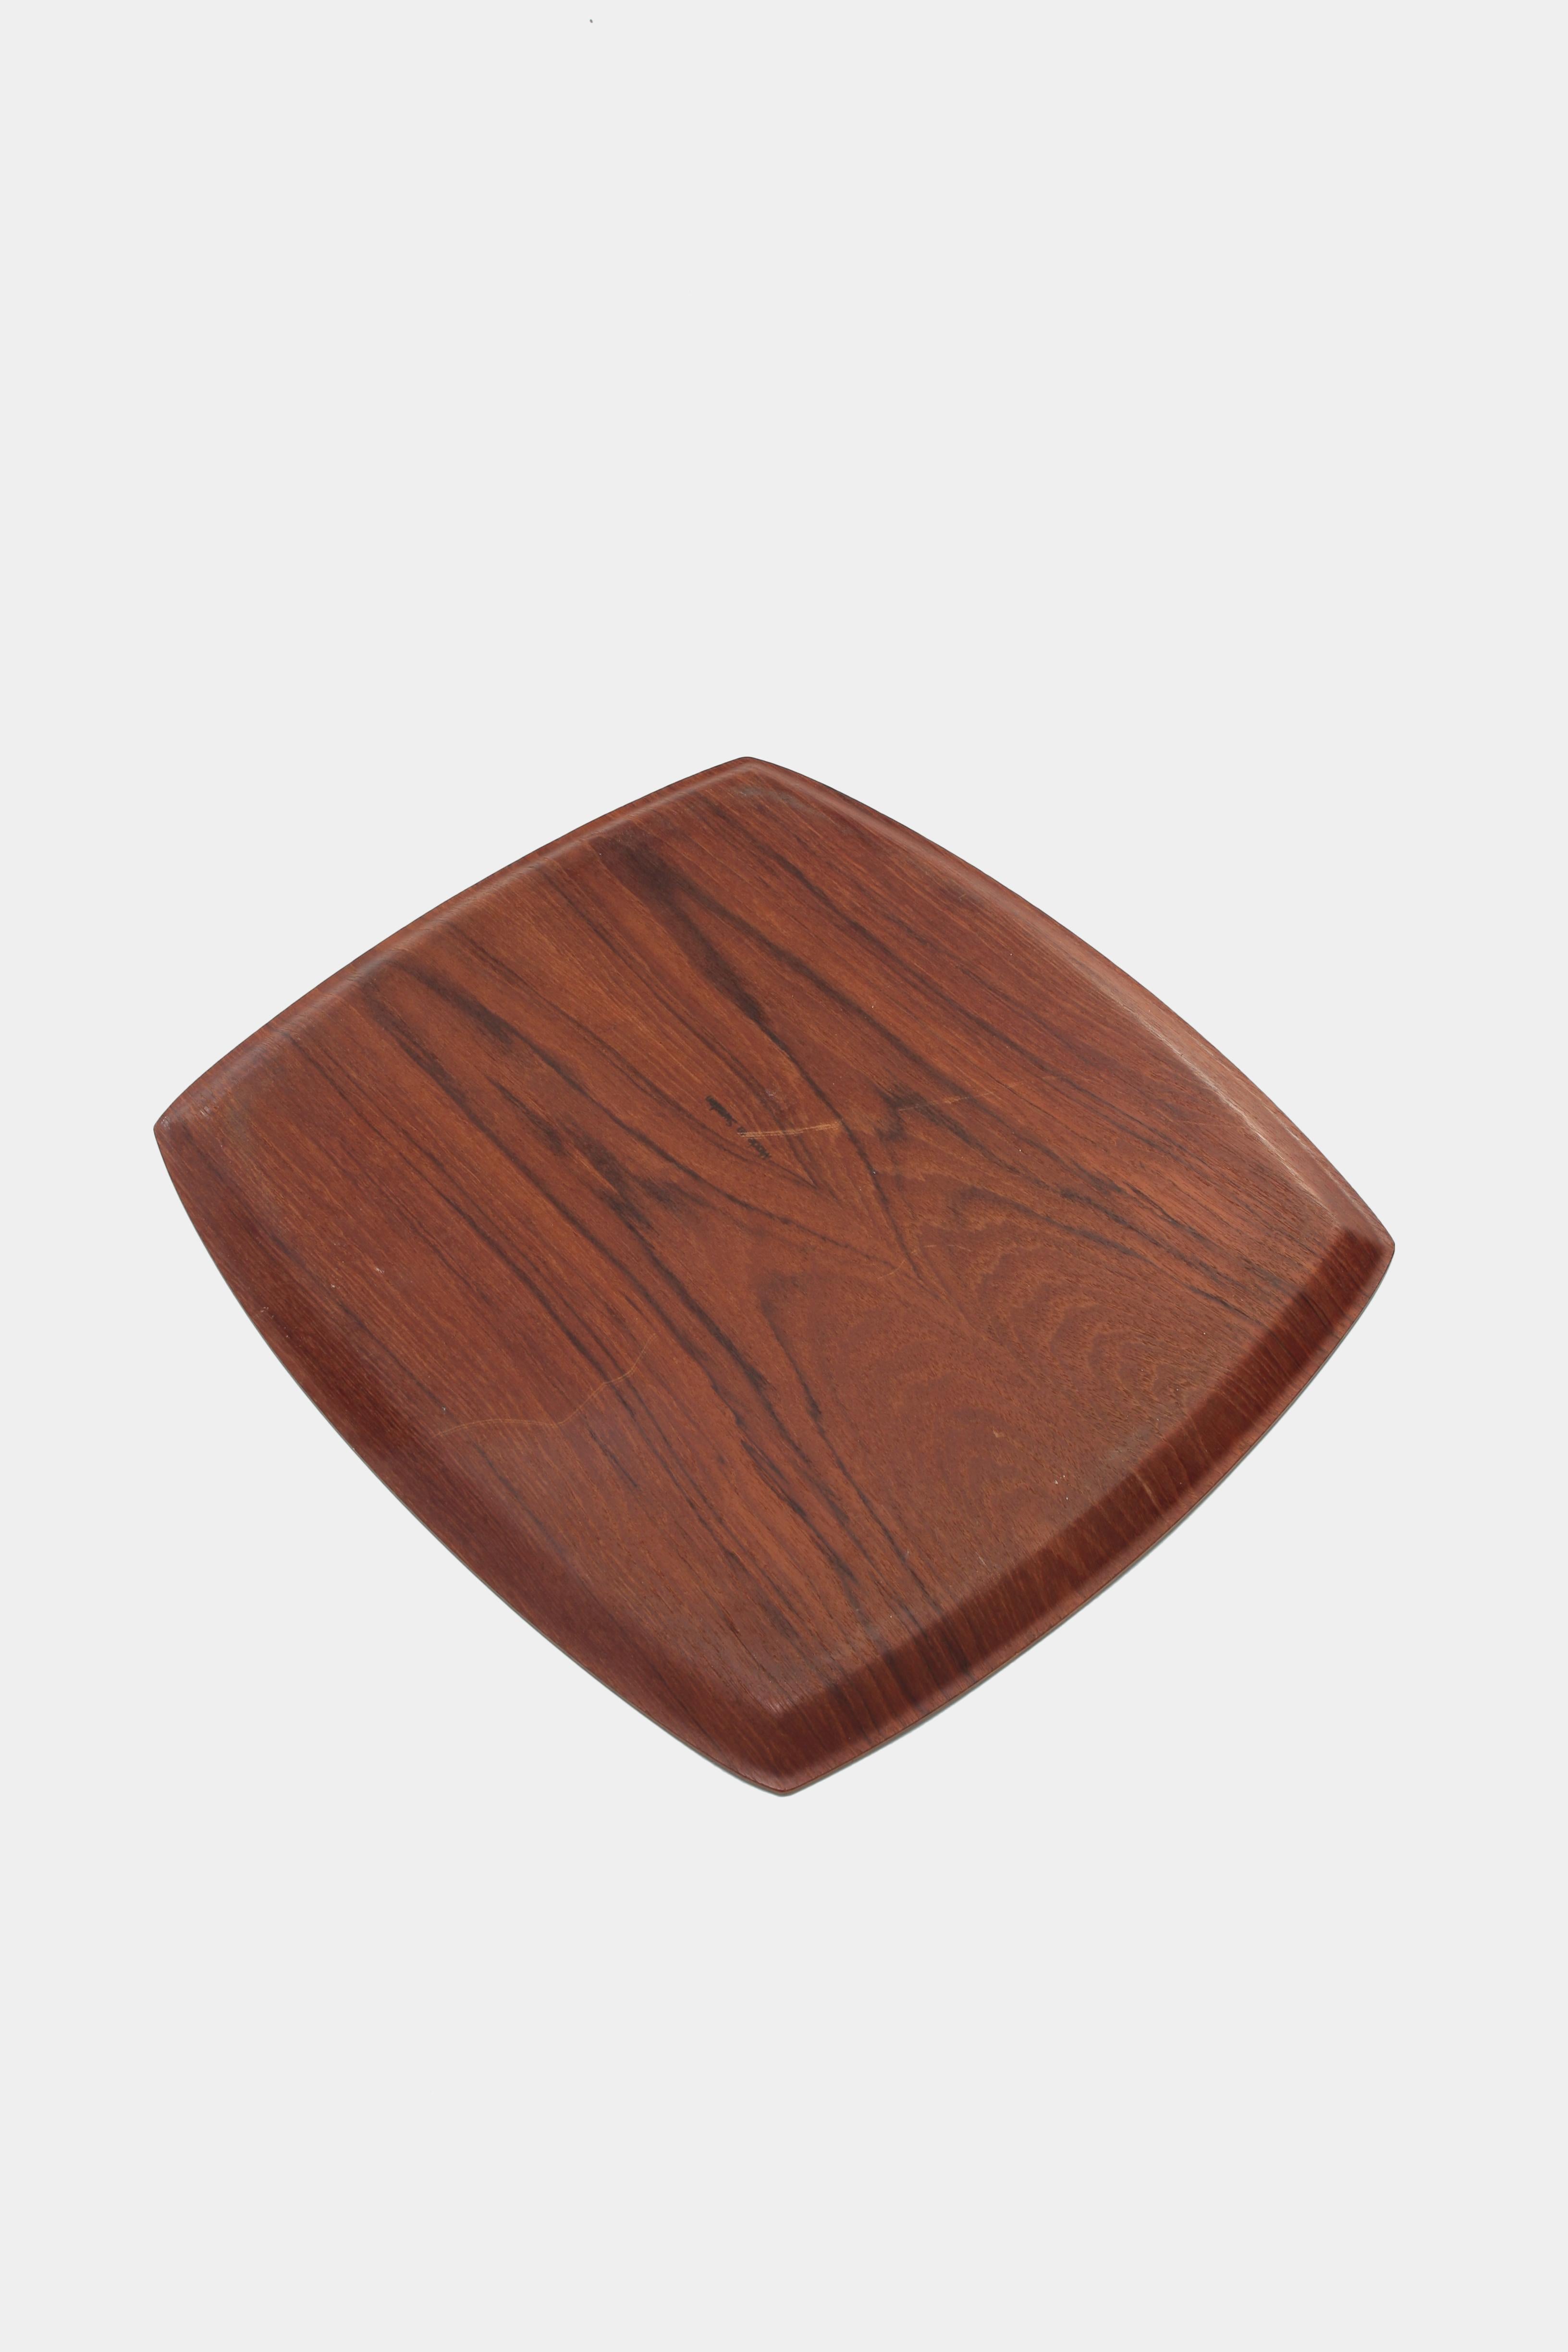 Swedish Serving Tray Teak, 1960s In Good Condition For Sale In Basel, CH